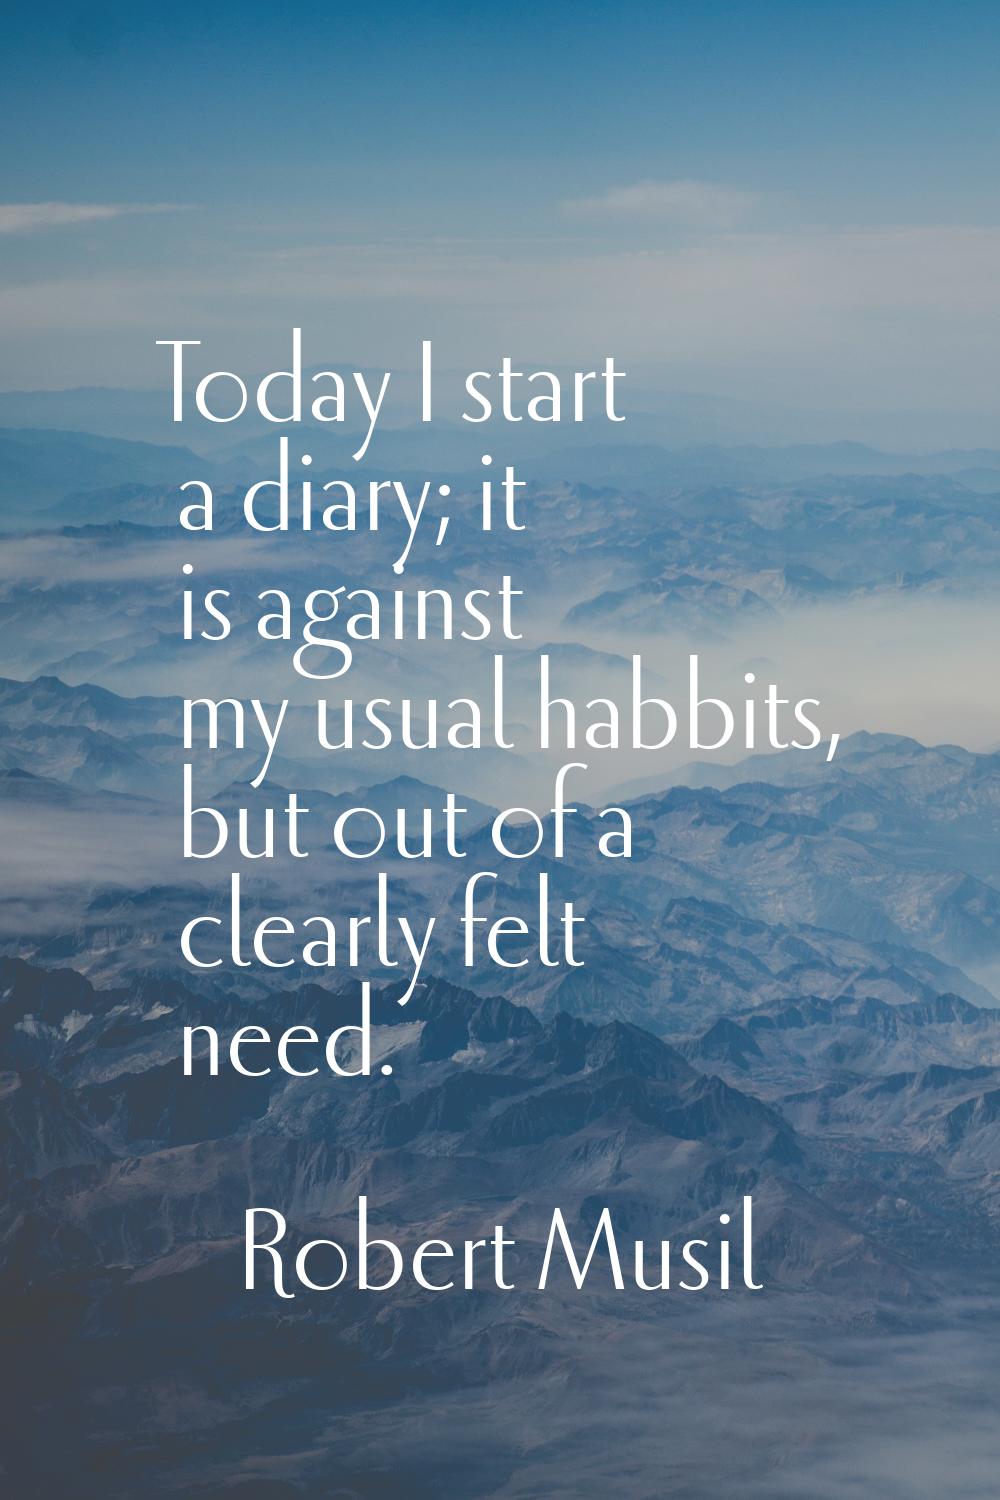 Today I start a diary; it is against my usual habbits, but out of a clearly felt need.